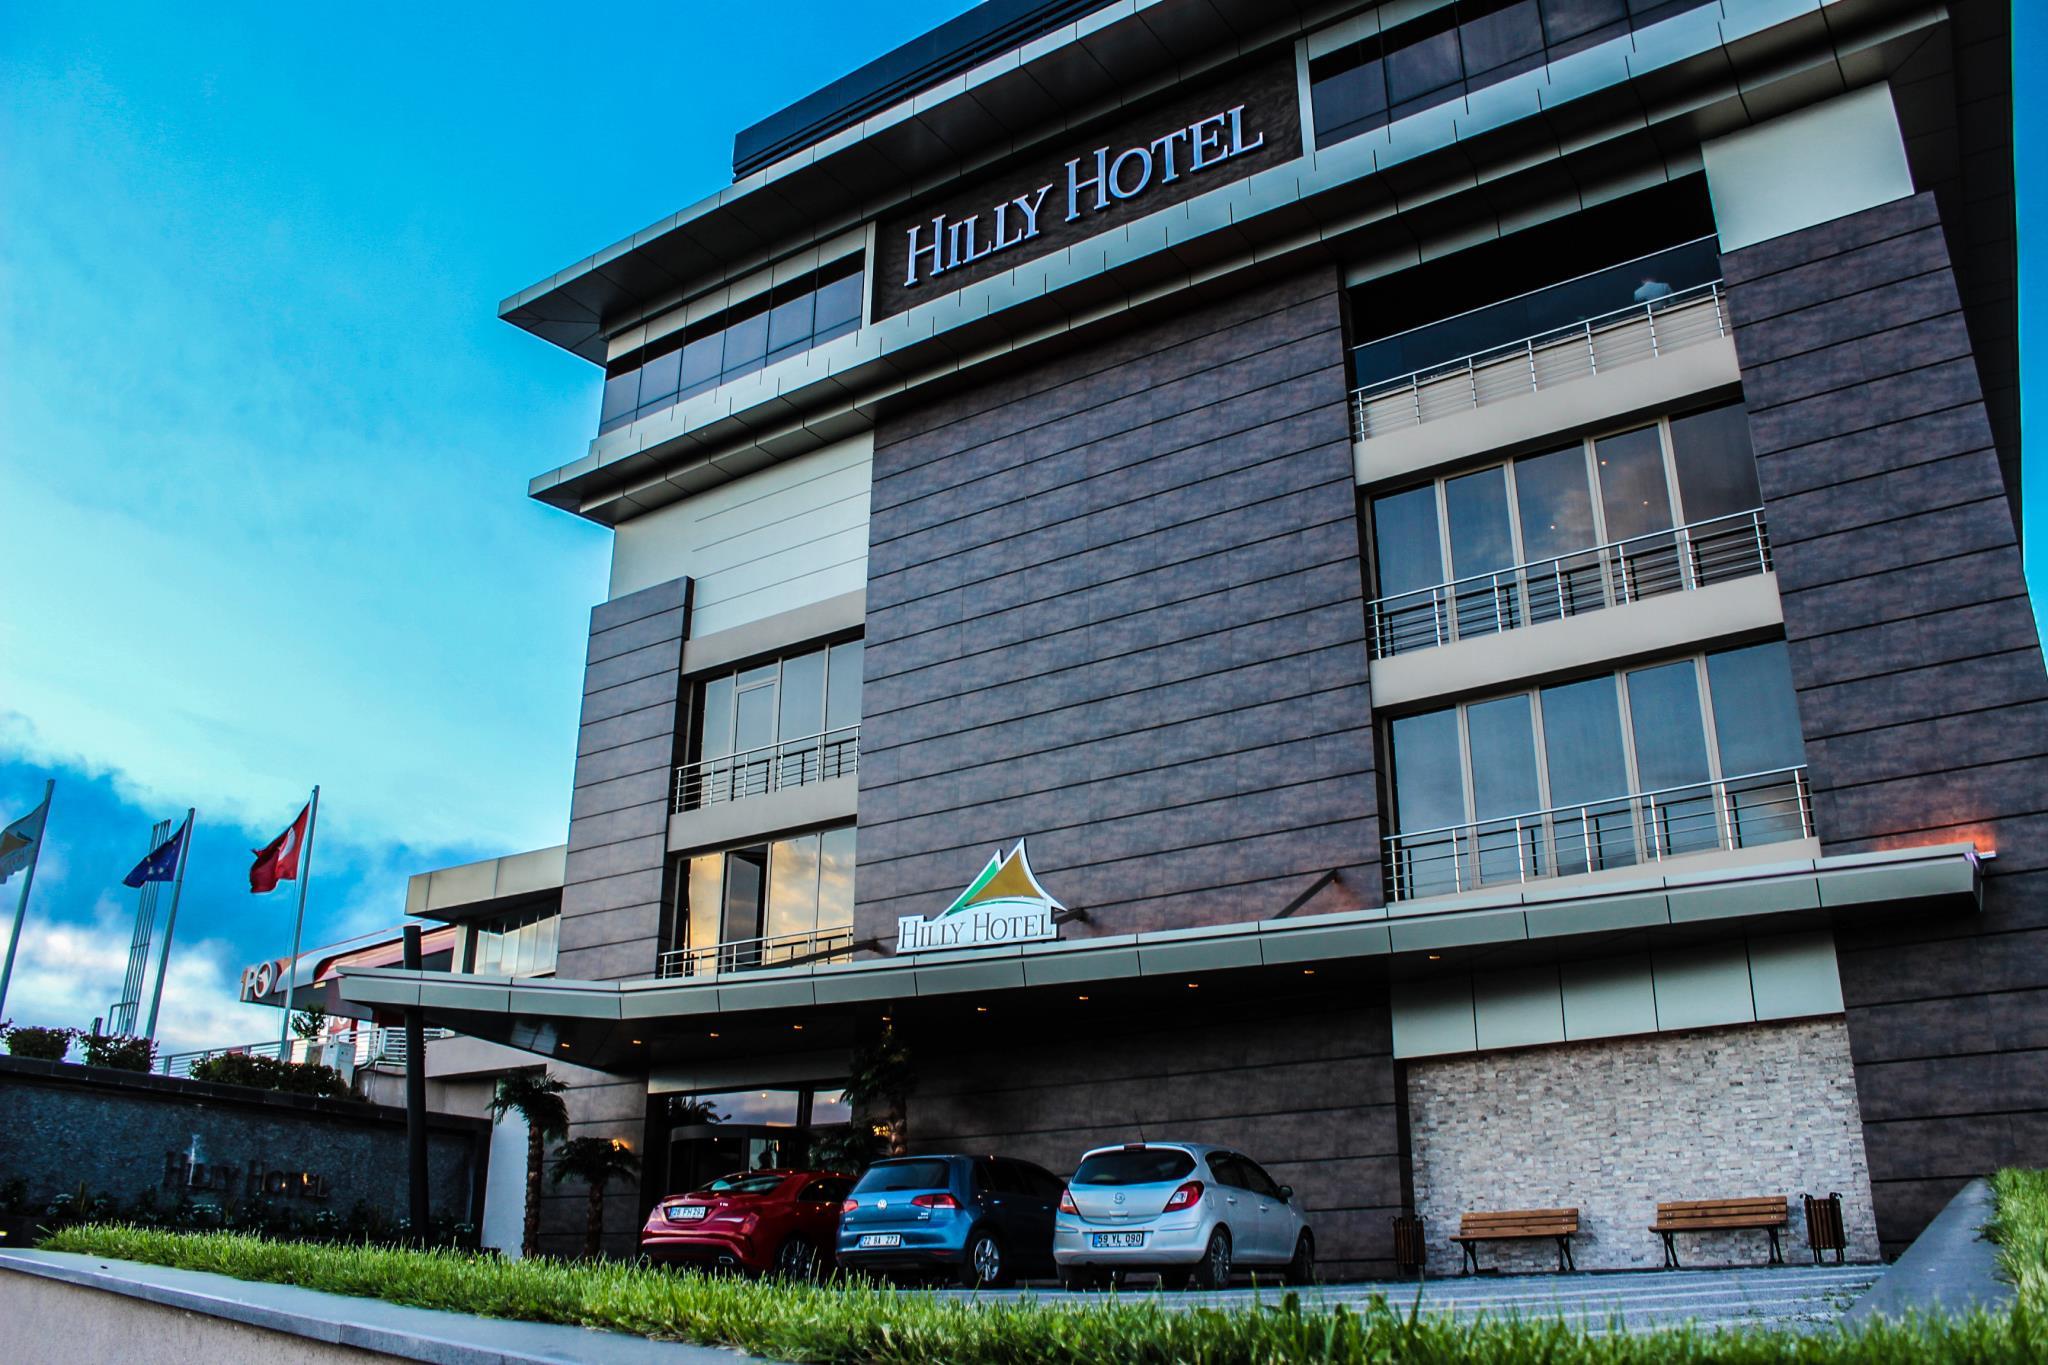 Hilly Hotel エヴロス Greece thumbnail